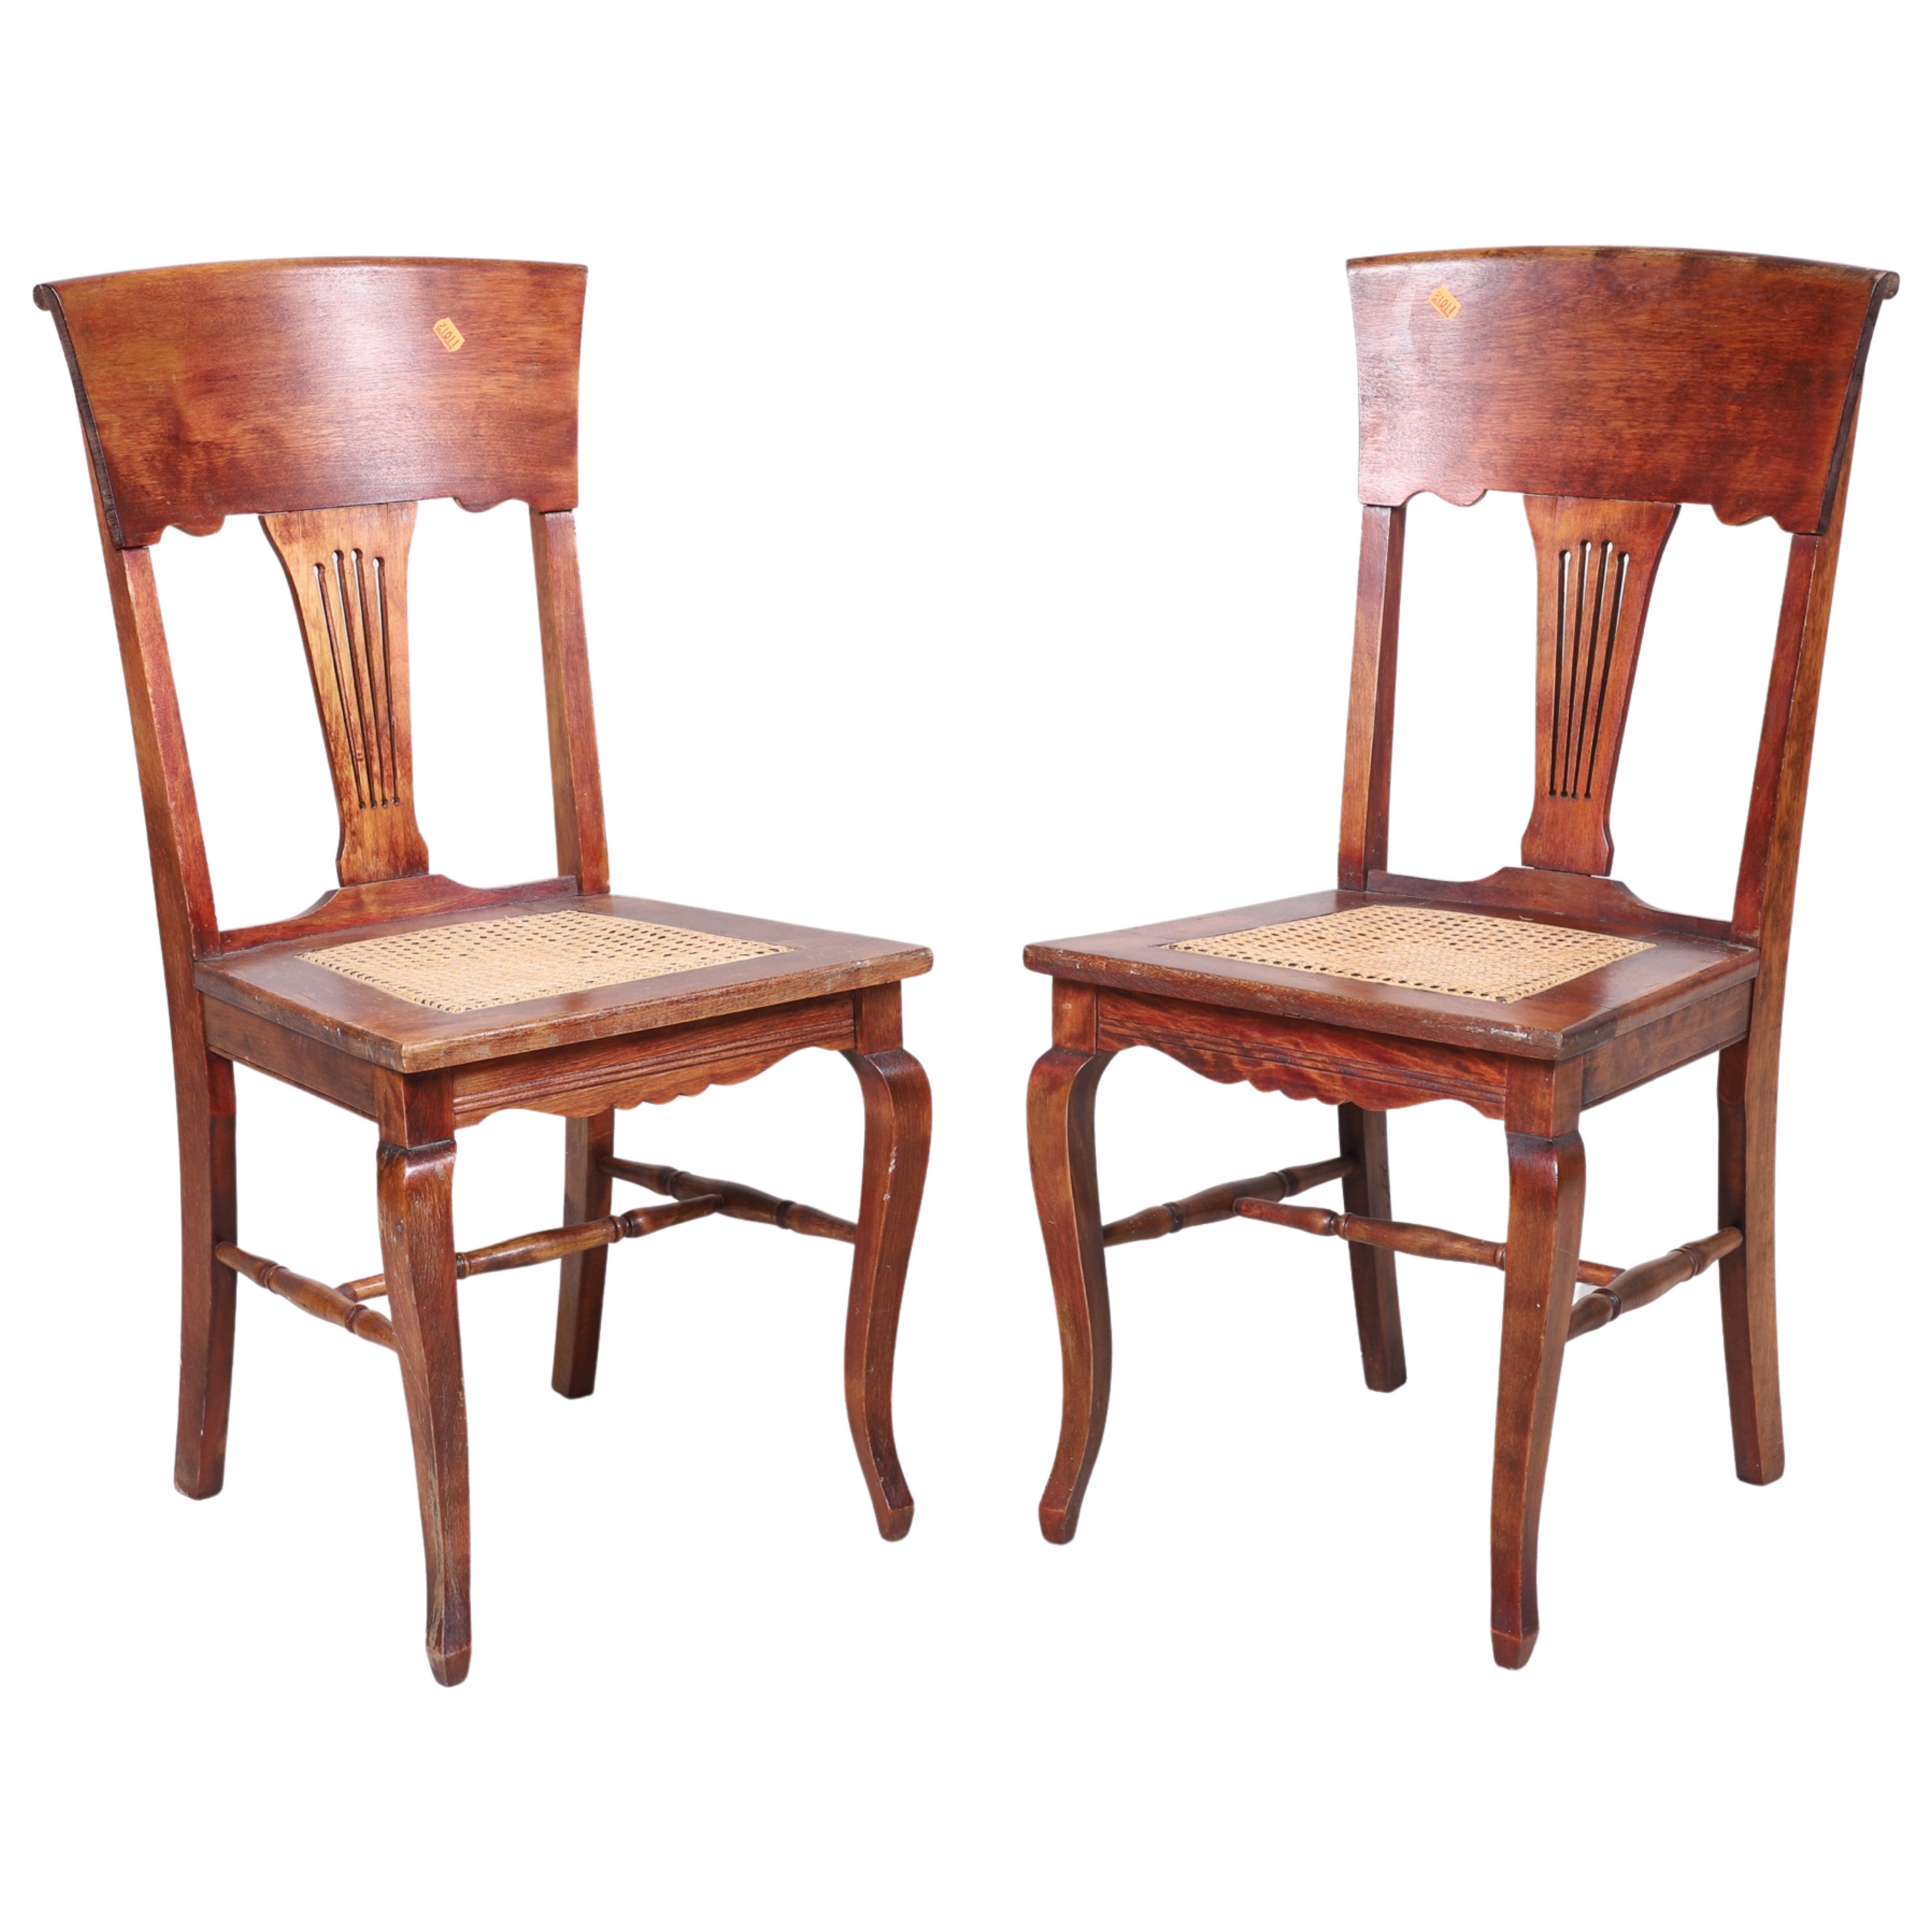 Pair French style mahogany and